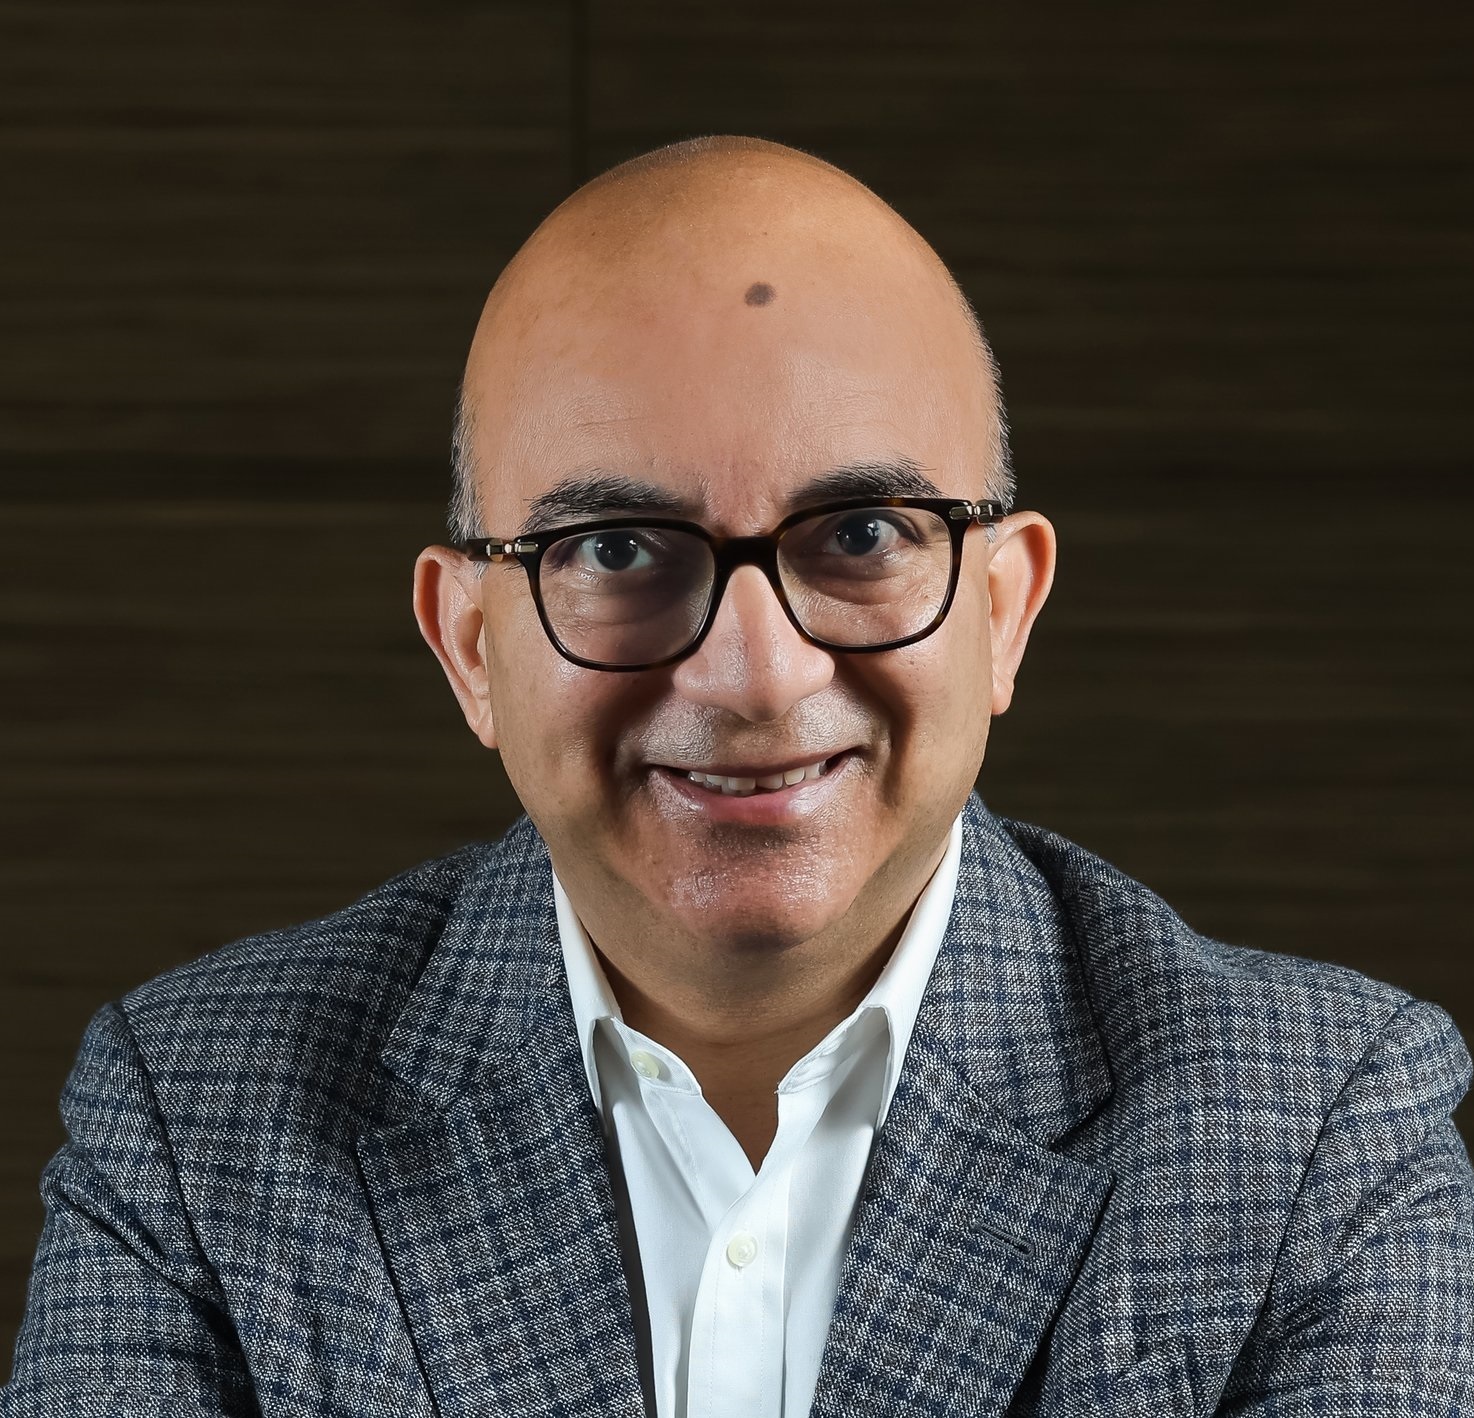 Make Decisions based on Values and Purpose: Interview with Rajeev Peshawaria, CEO of Stewardship Asia Centre